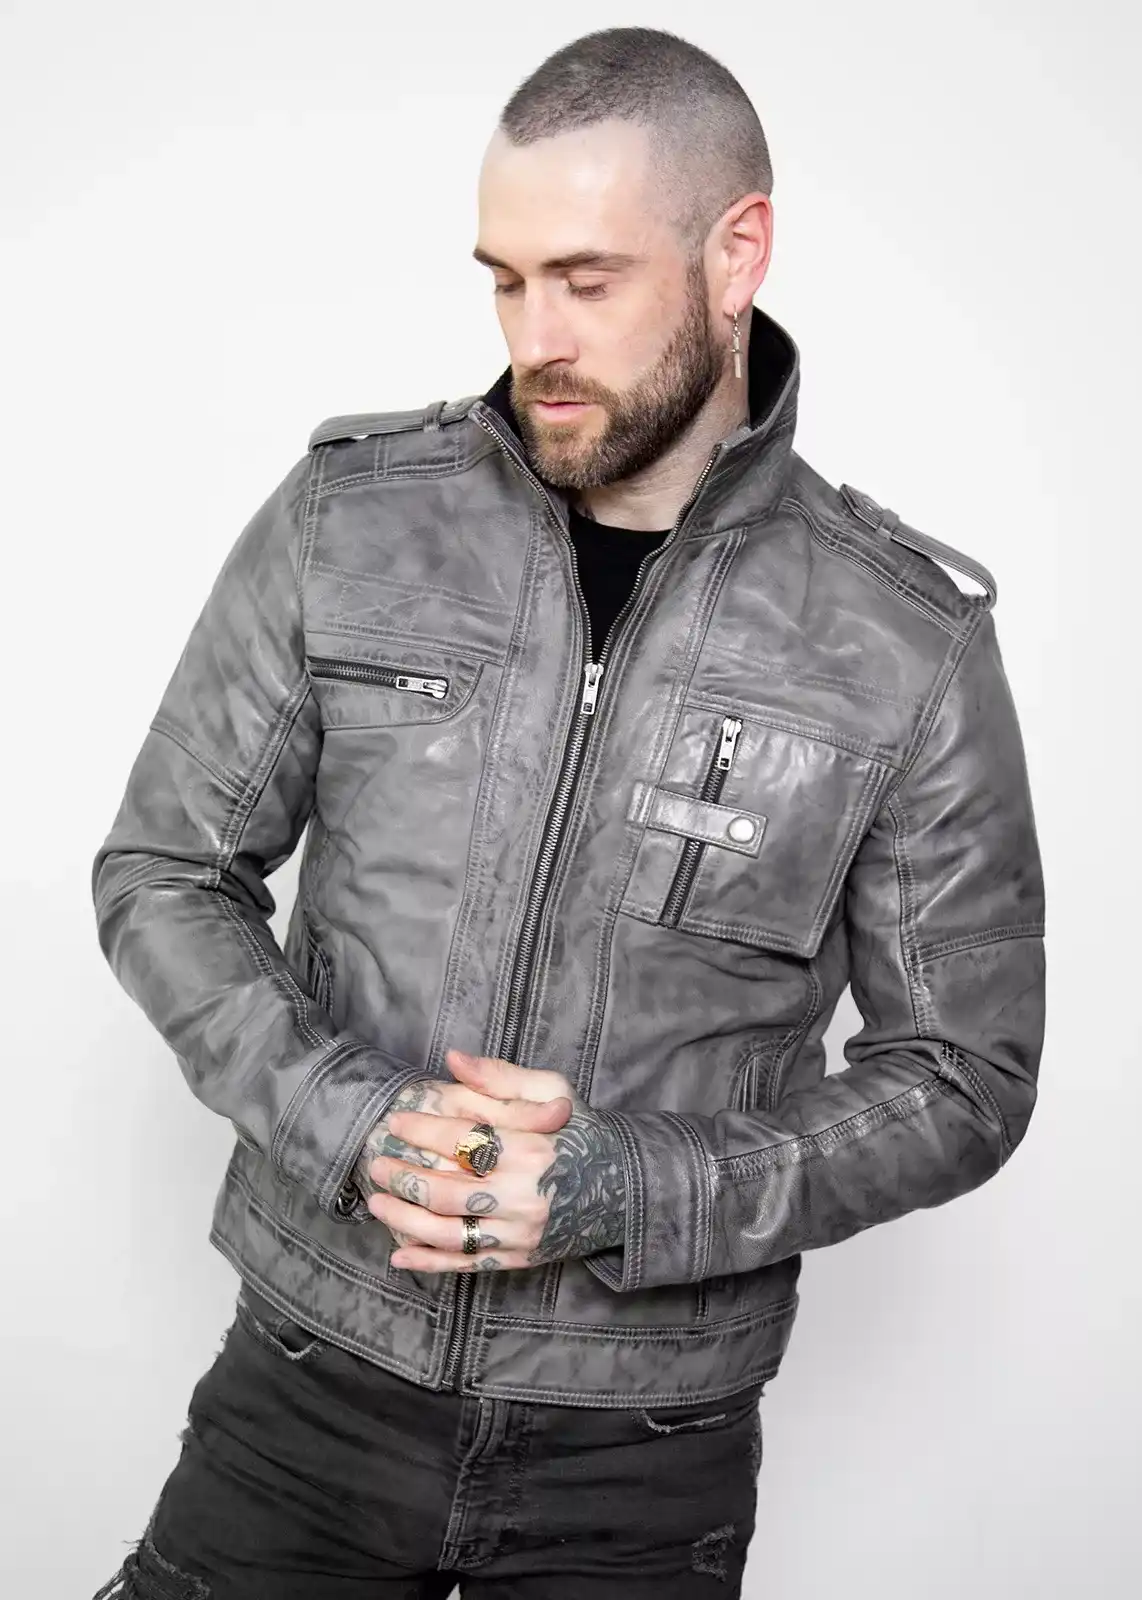 Buy Men's Gray Military Style Distressed Leather Jacket